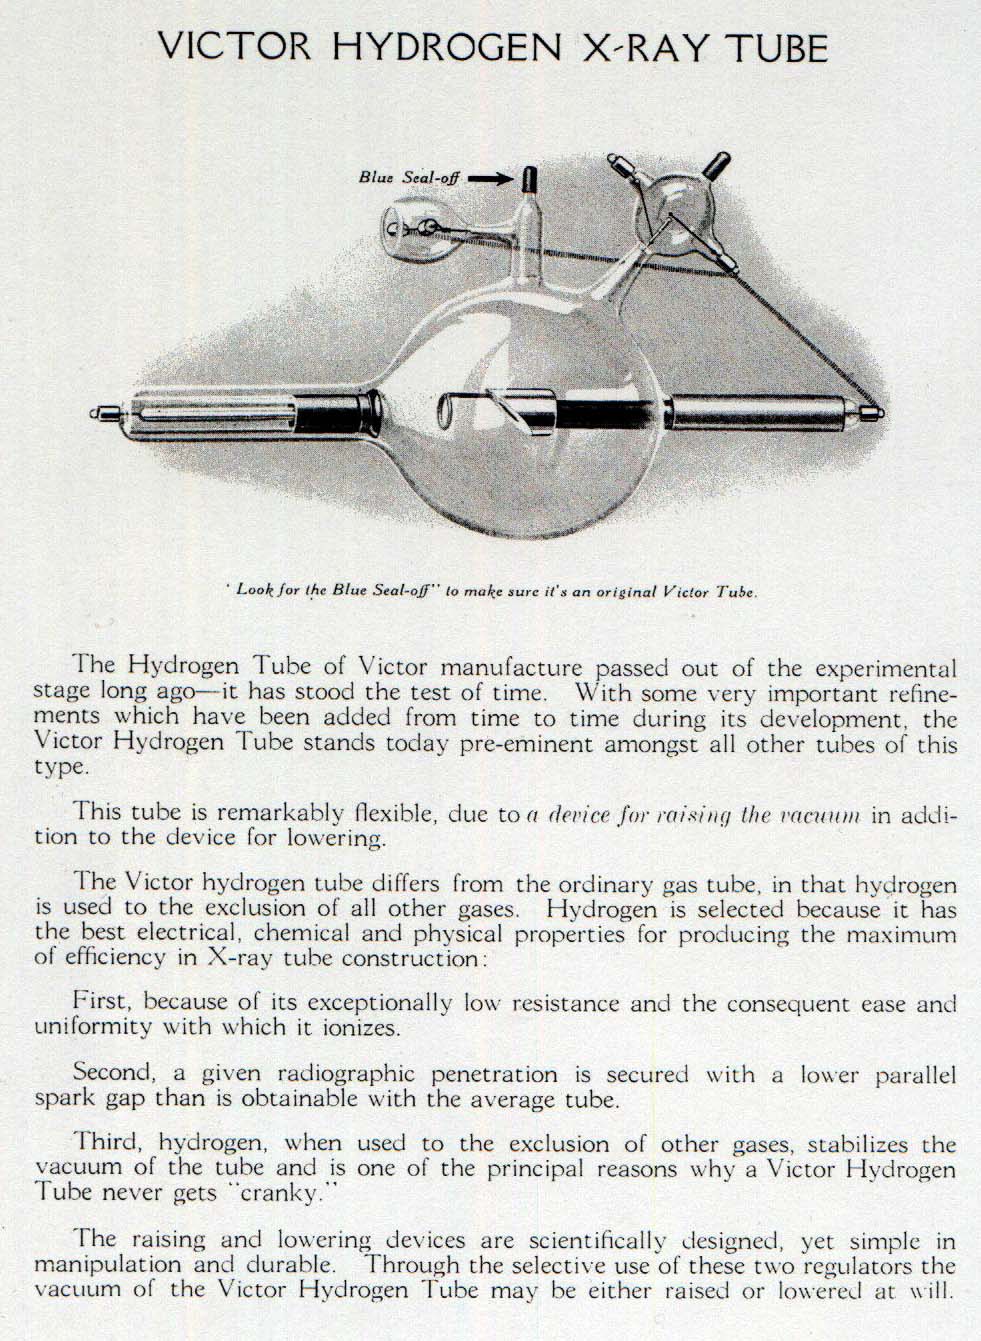 The Snook Hydrogen Tube (1915-1925)